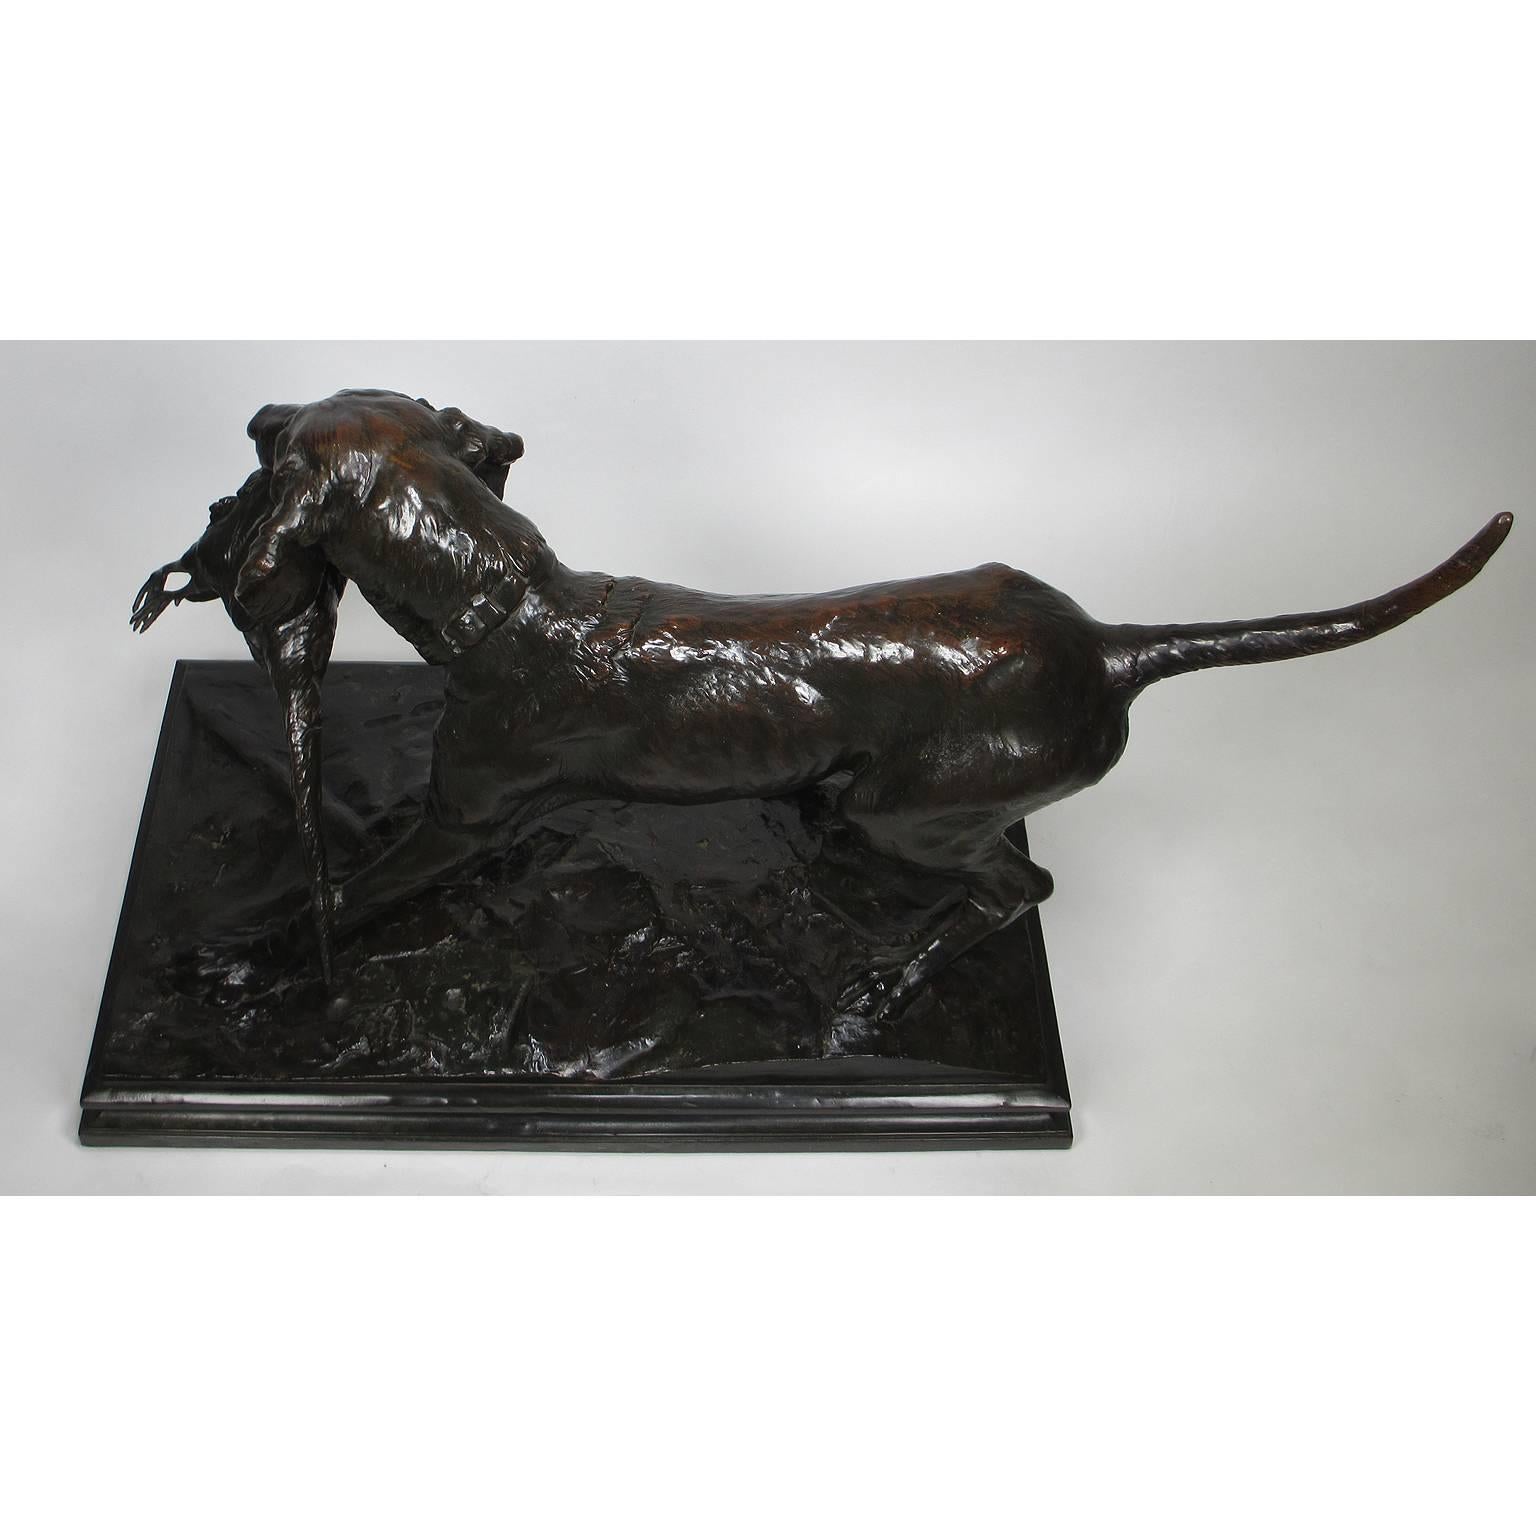 19th Century Emil Wünsche Hunting Sculpture of a Hound and Pheasant Prey For Sale